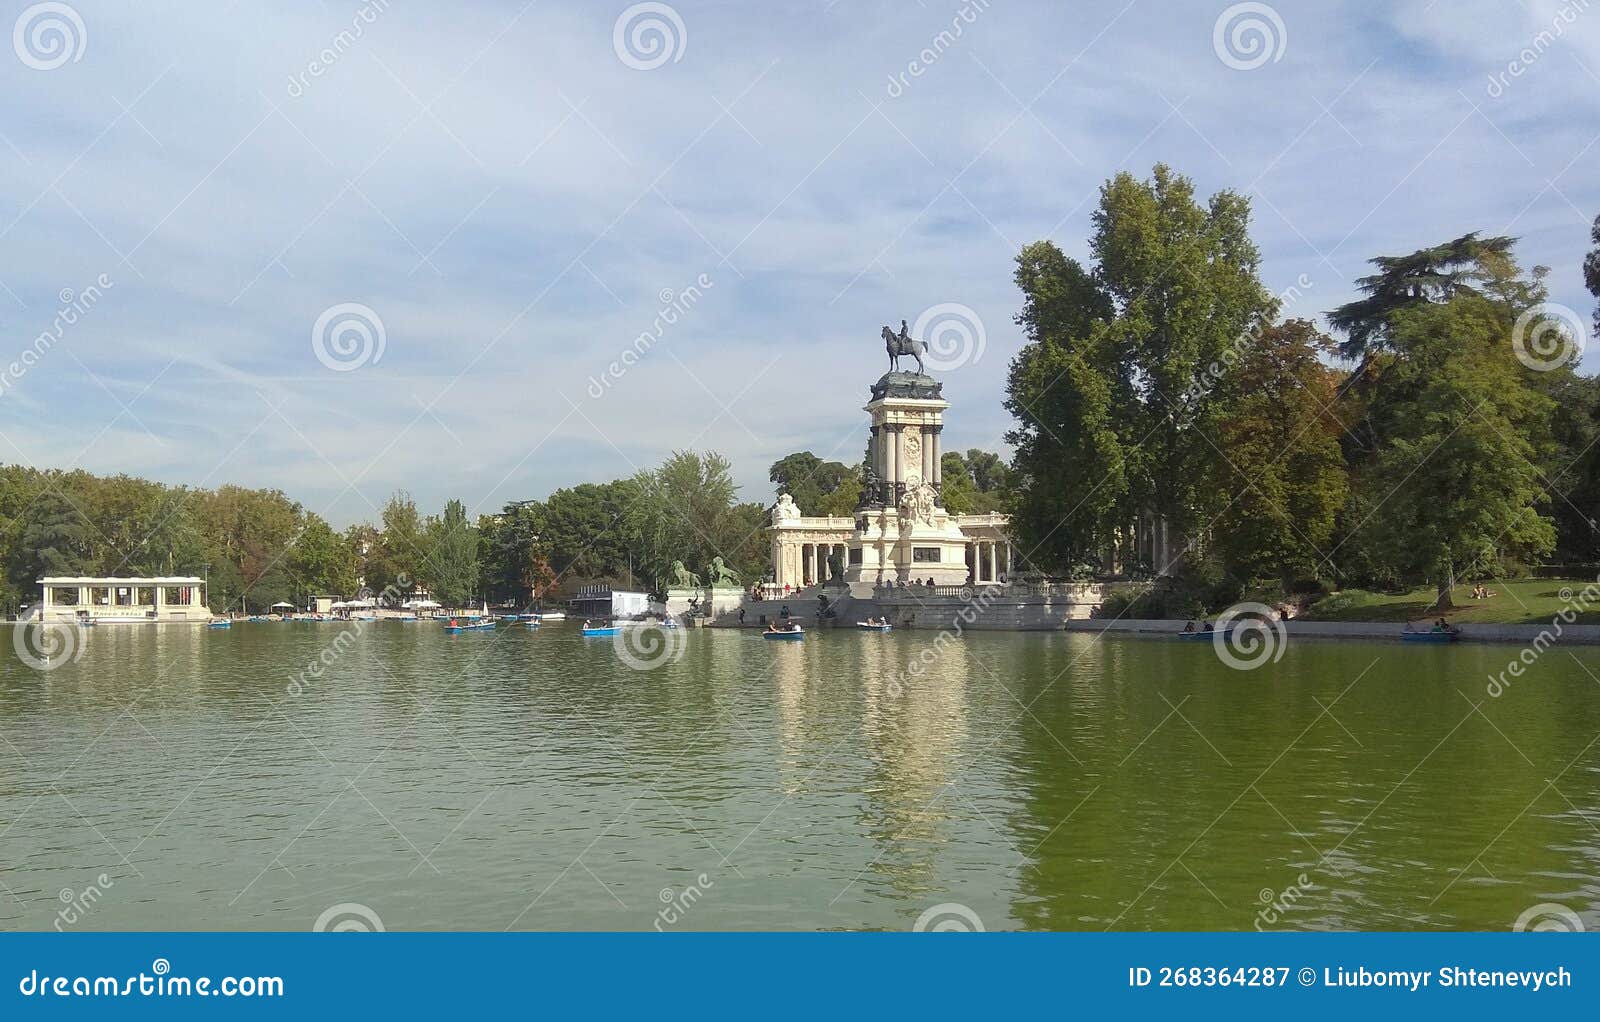 spain, madrid, el retiro park, estanque grande del retiro, view of the lake and the monument to alfonso xii